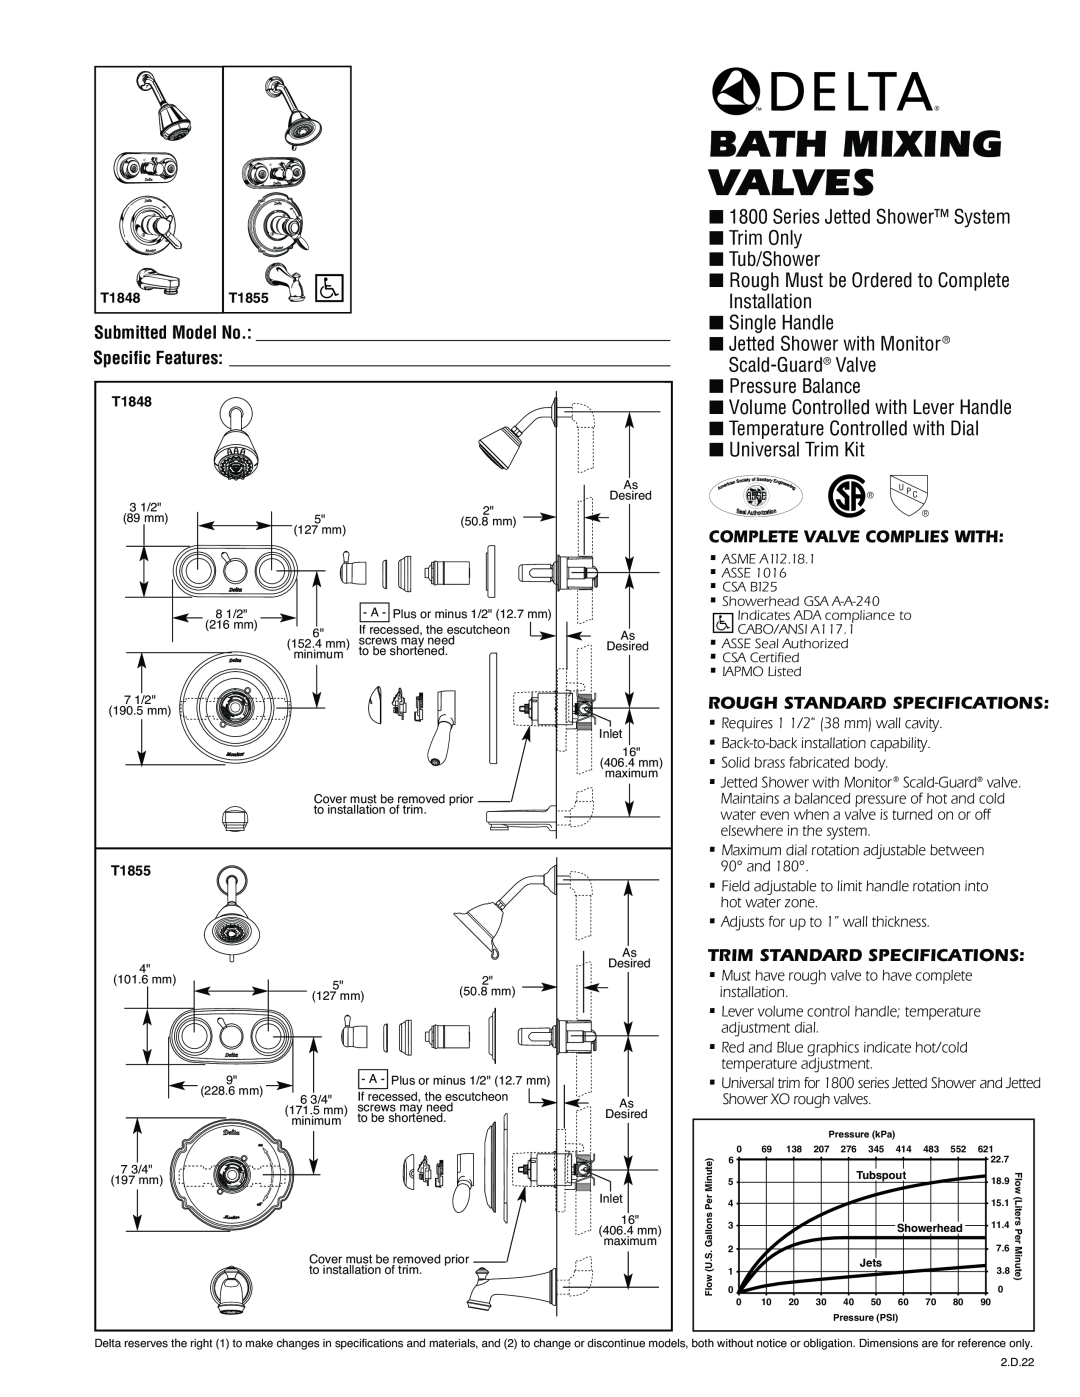 Delta T1855 specifications Complete Valve Complies With, Rough Standard Specifications, Trim Standard Specifications 